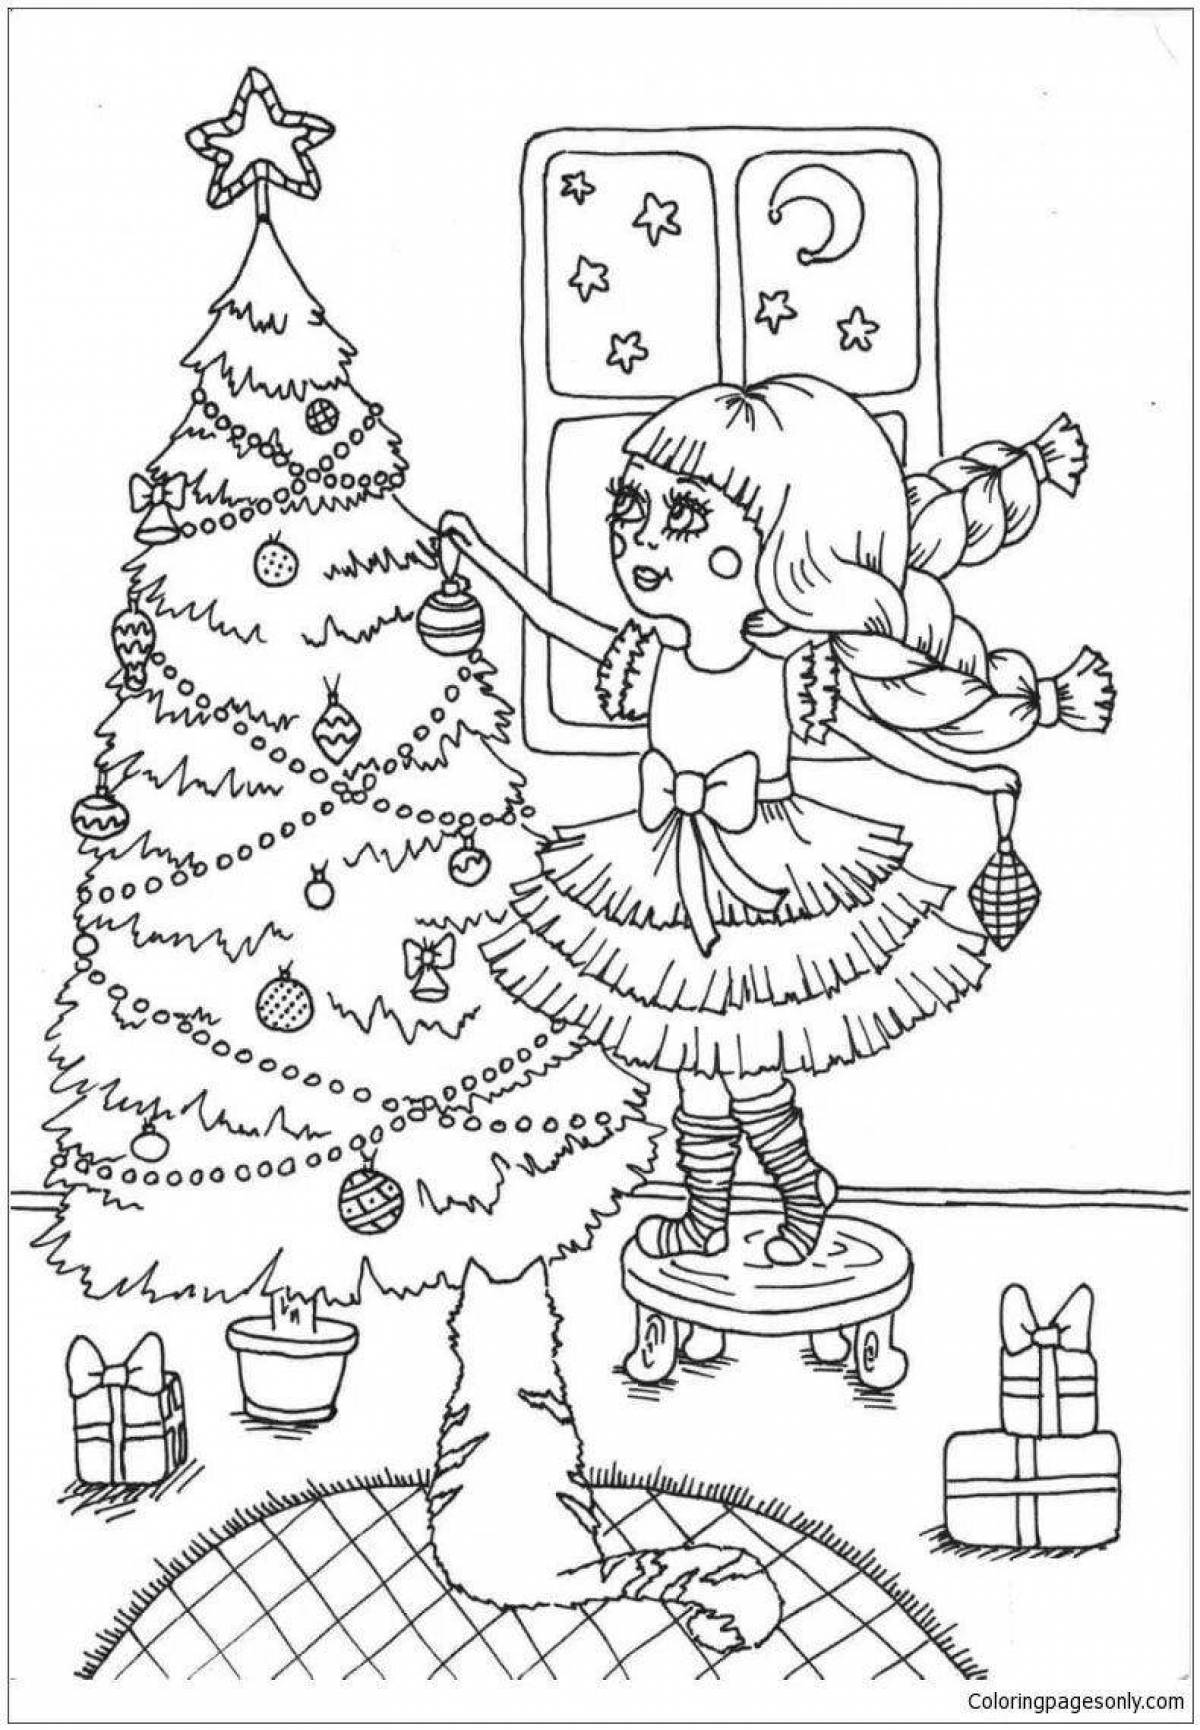 December holiday coloring book for kids